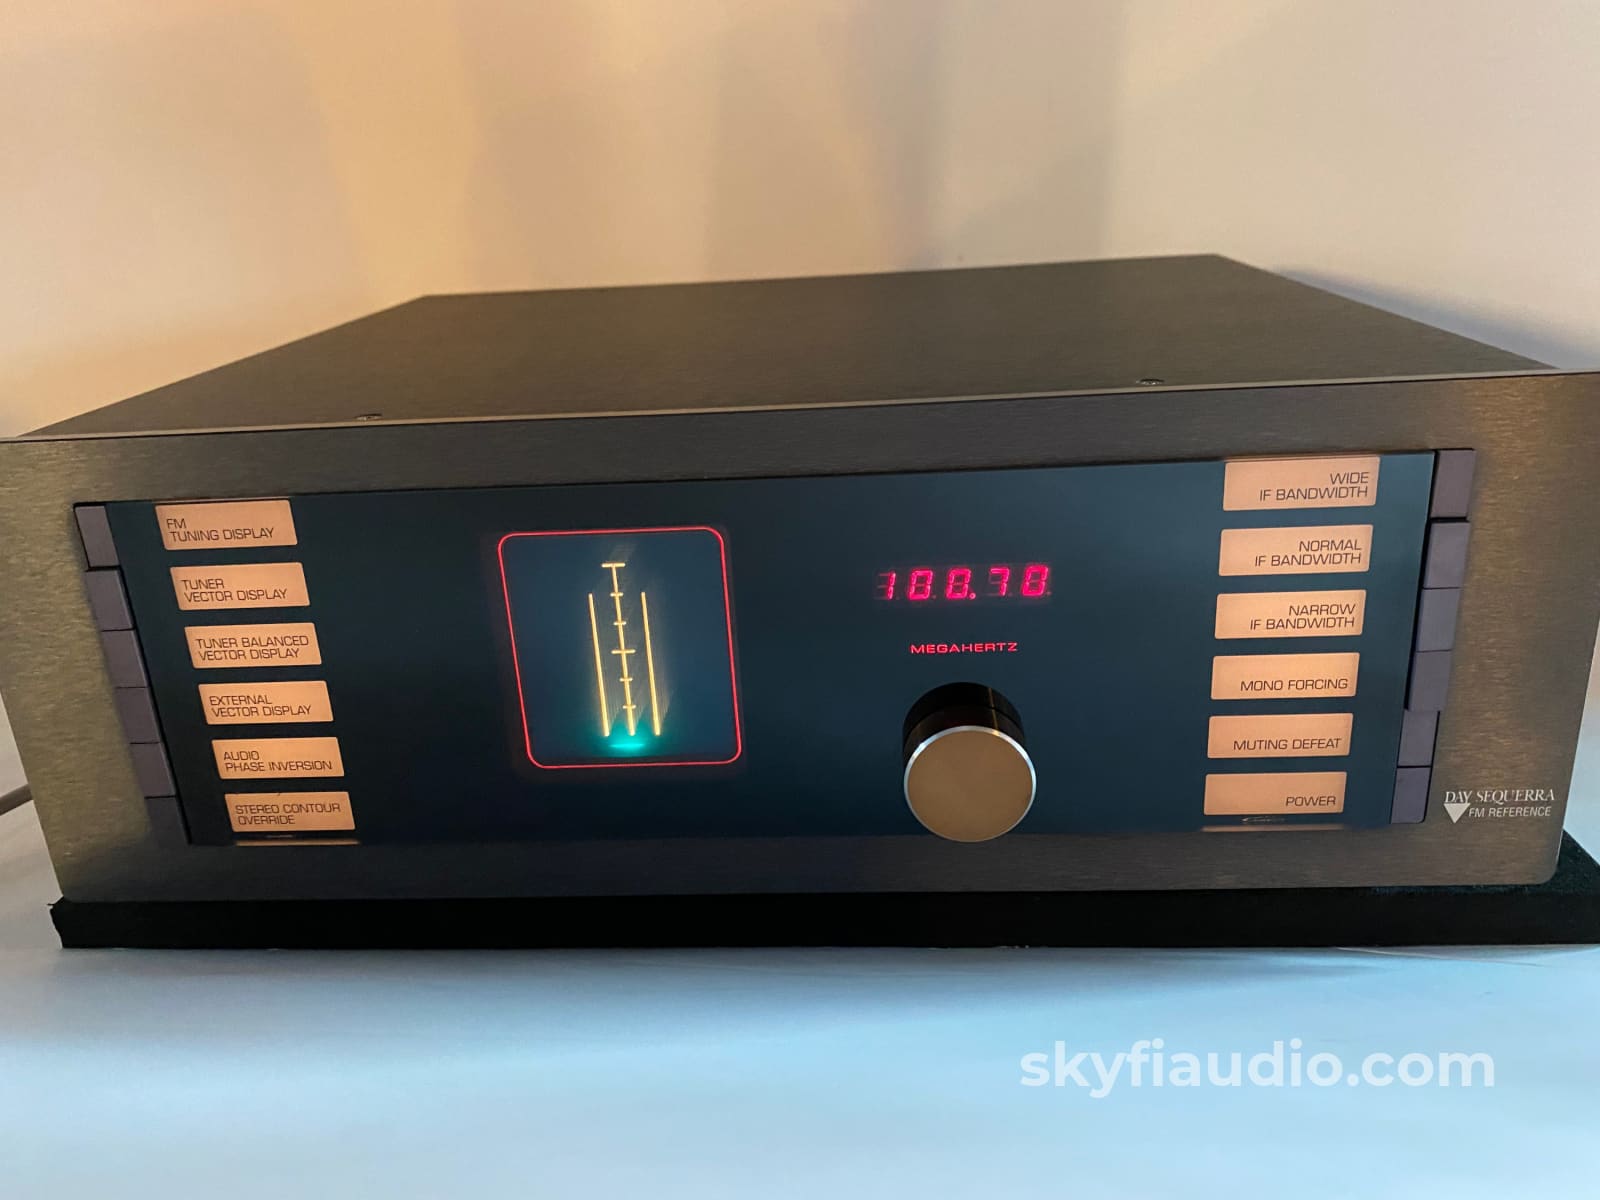 Day Sequerra Fm Reference Tuner - The Best!